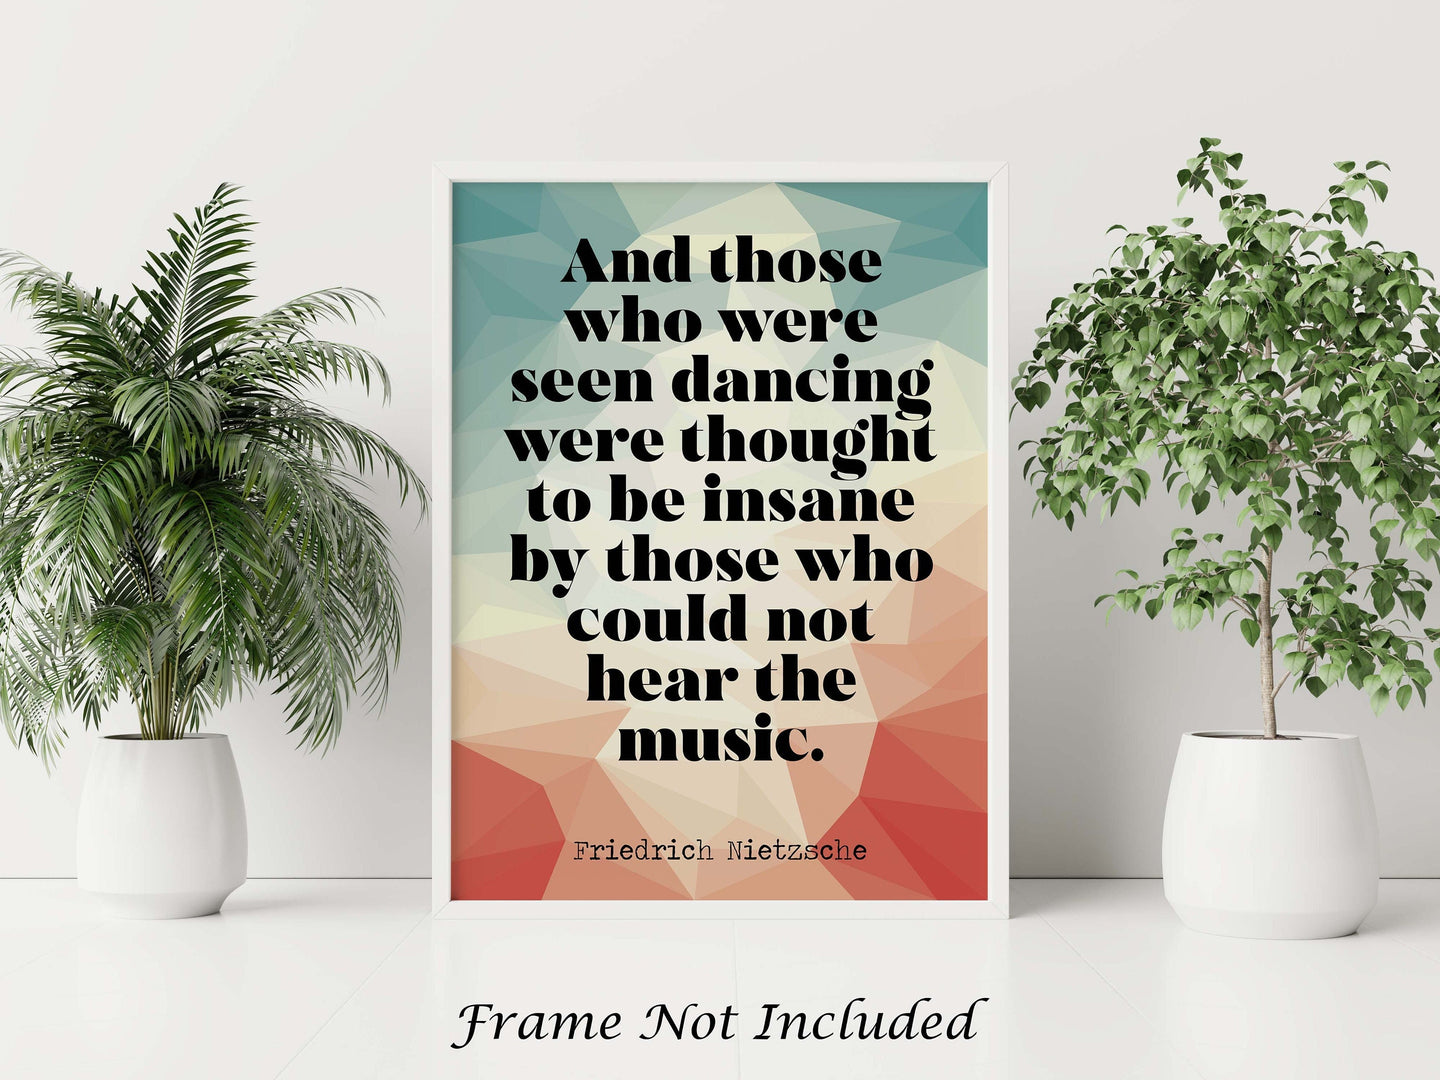 Nietzsche quote - Those who were seen dancing ... who could not hear the music - philosophy print - office decor - UNFRAMED